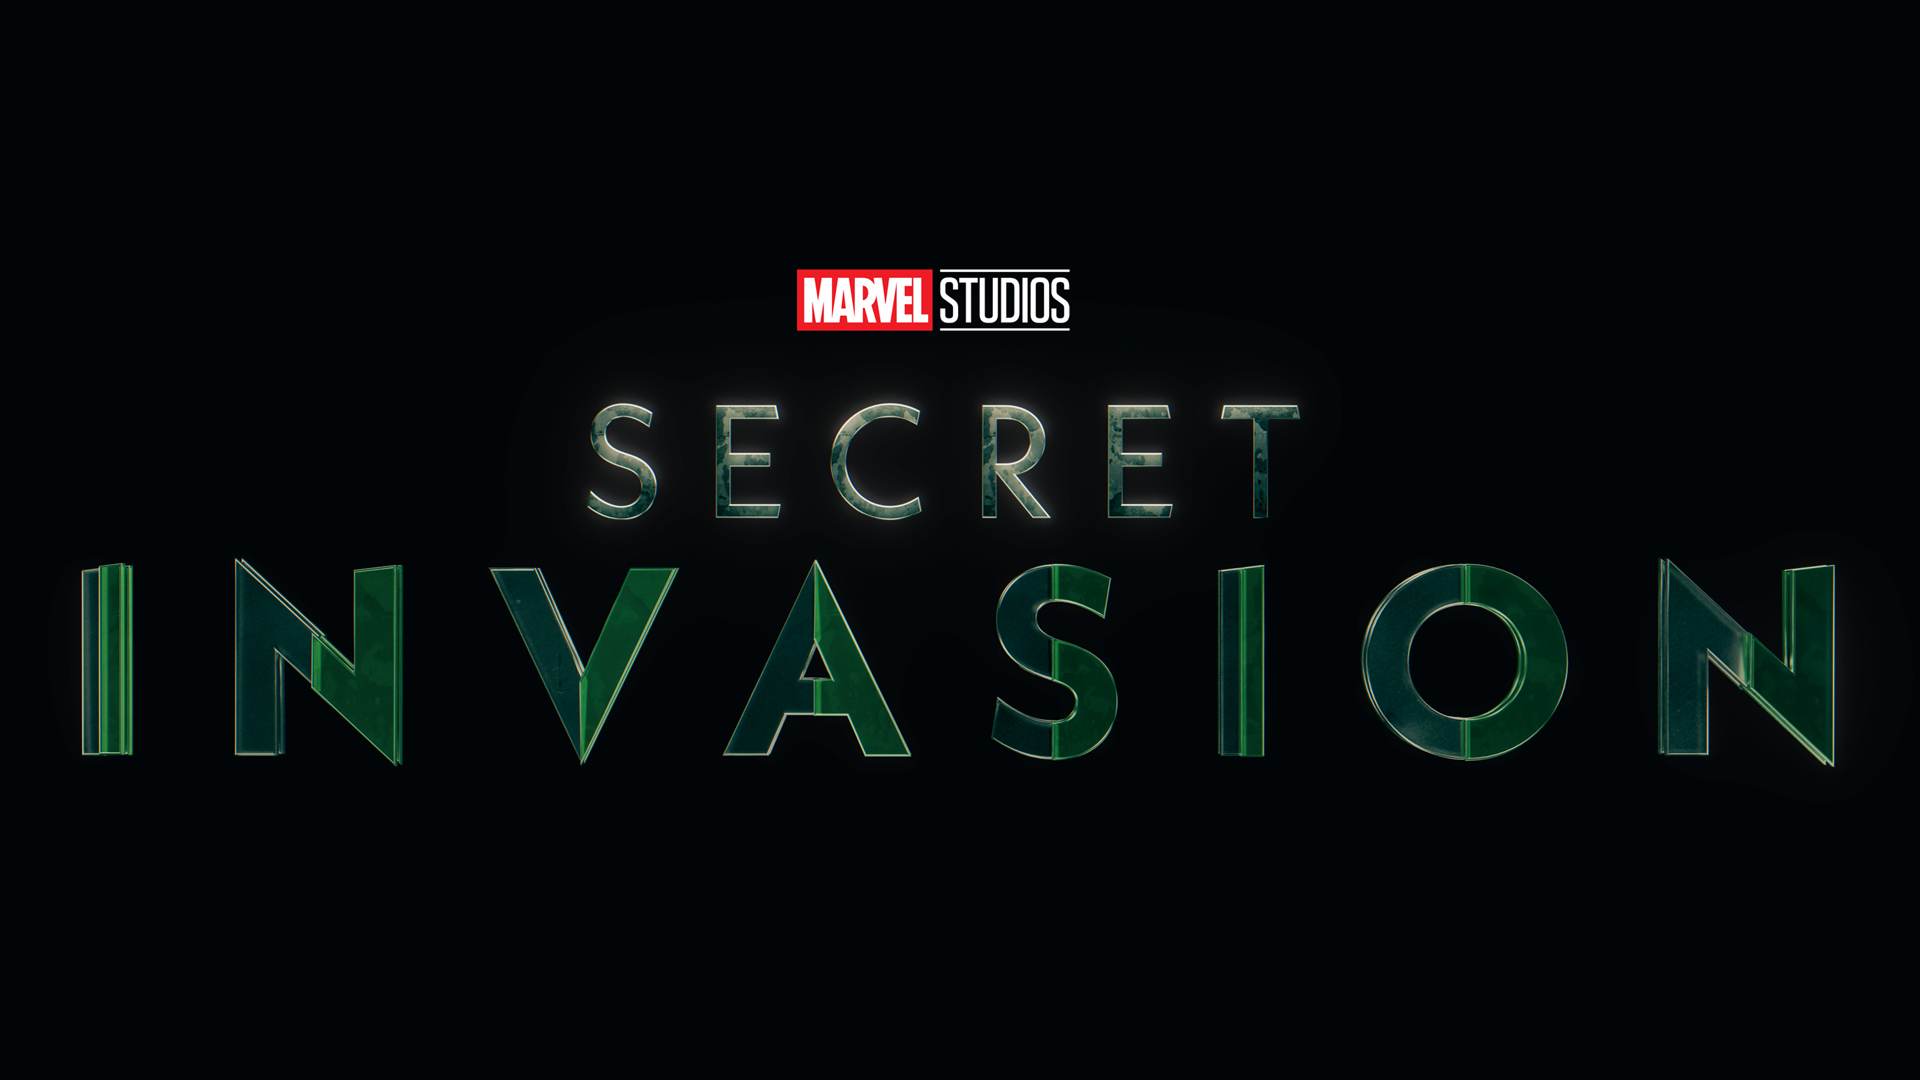 Release date revealed for Marvel’s Secret Invasion Coming to Disney+